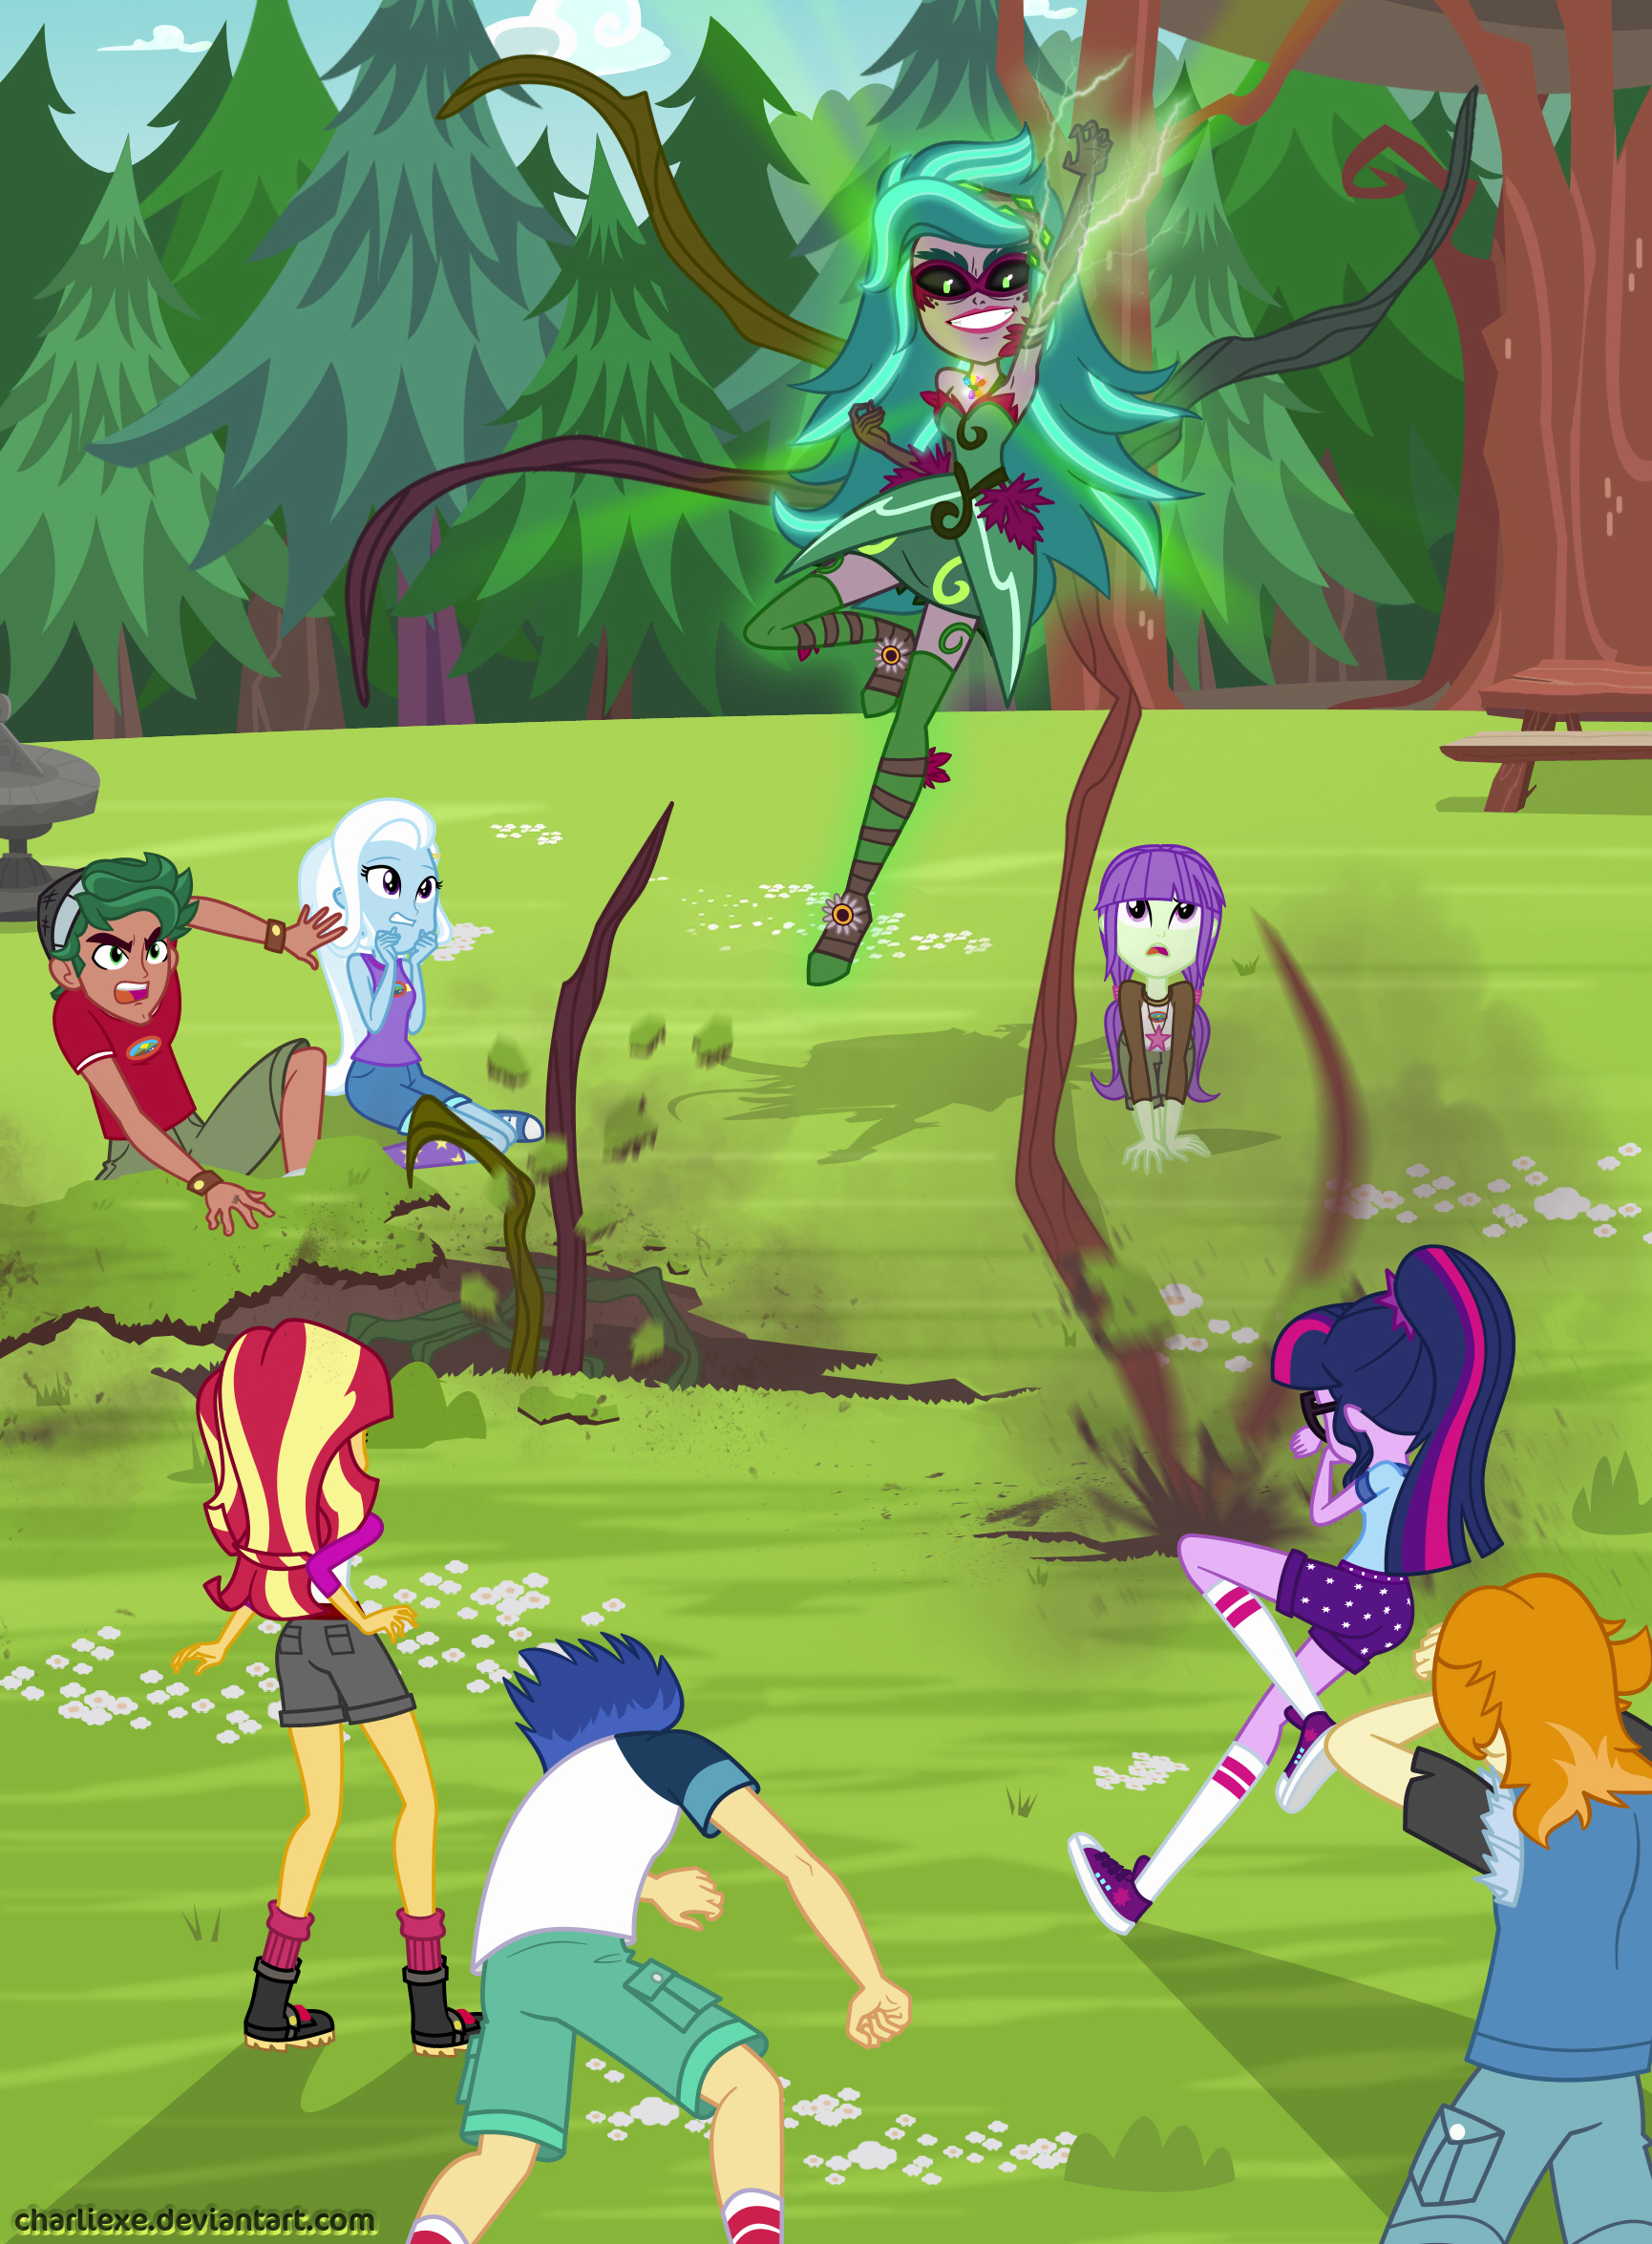 My Little Pony: Equestria Girls - Legend of Everfree Art by charliexe